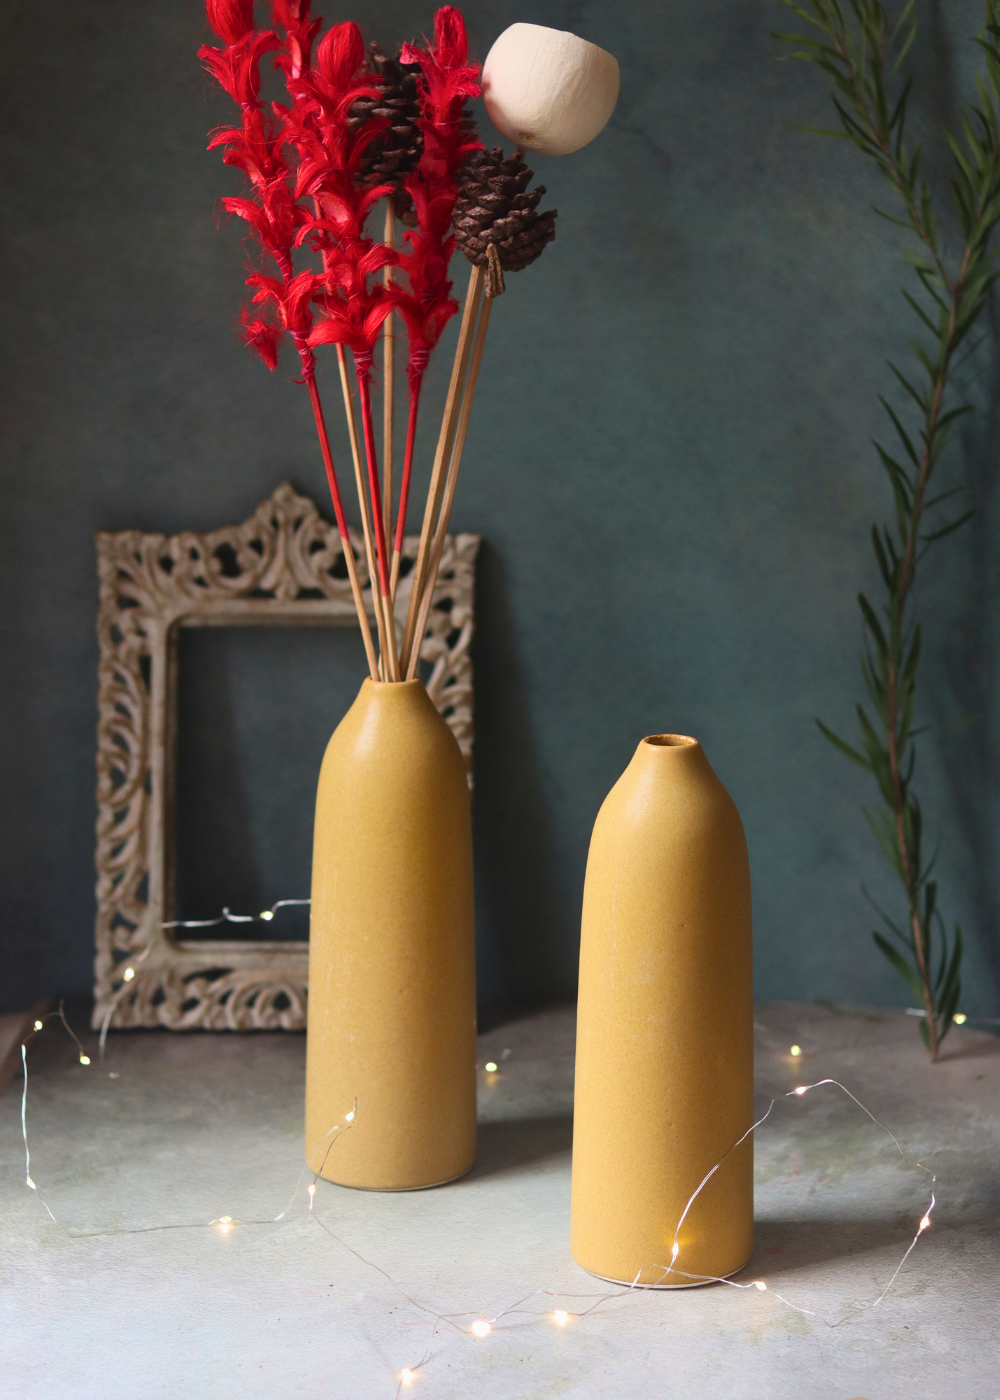 Two ceramic flower vases with flowers